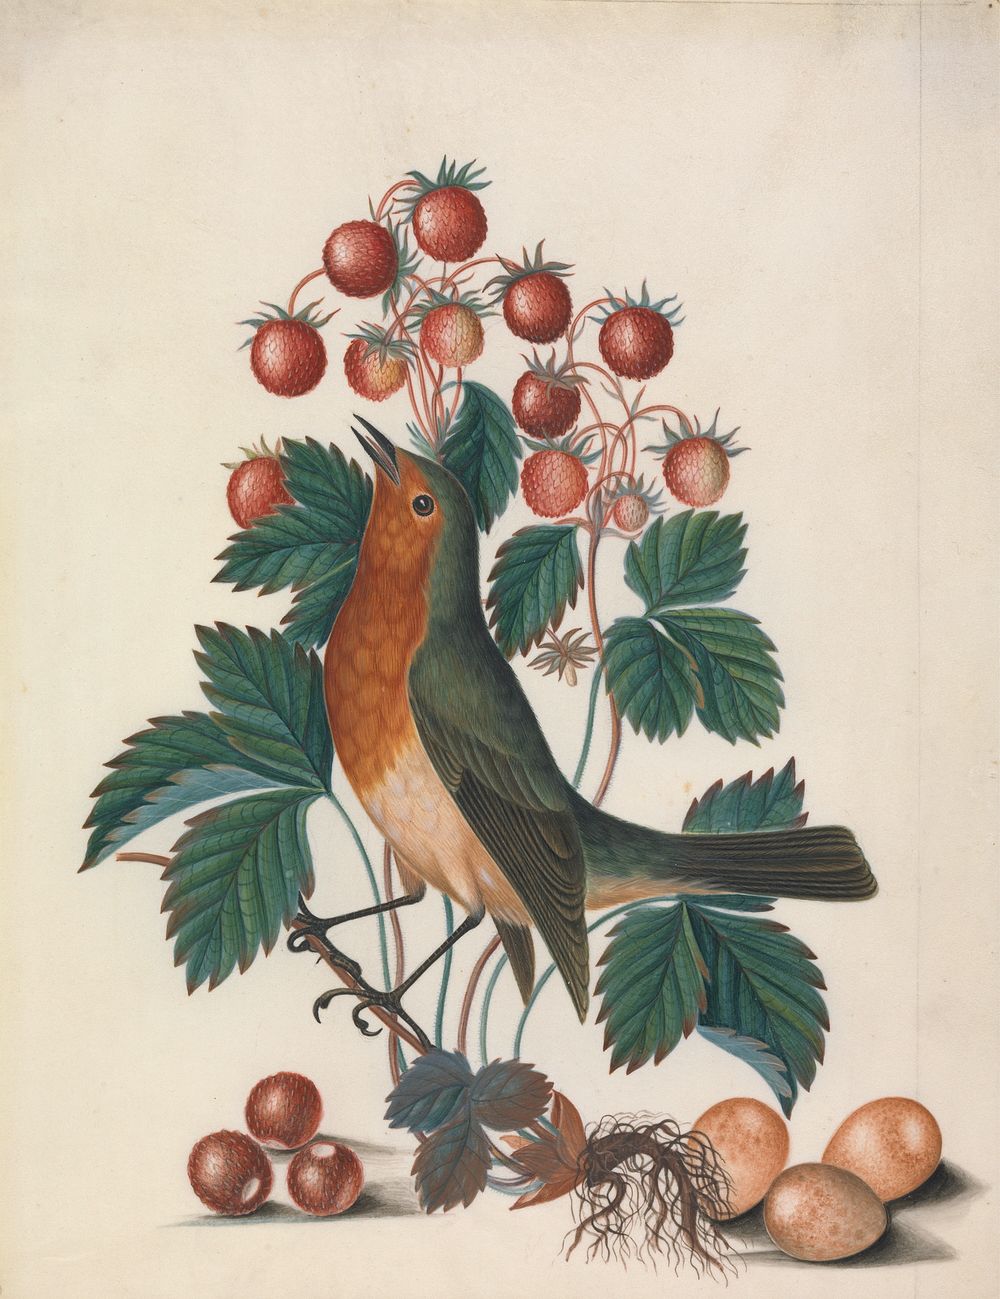 European robin (Erithacus rubecula) and eggs, with wild strawberry (Fragaria vesca L.) from the Natural History Cabinet of…